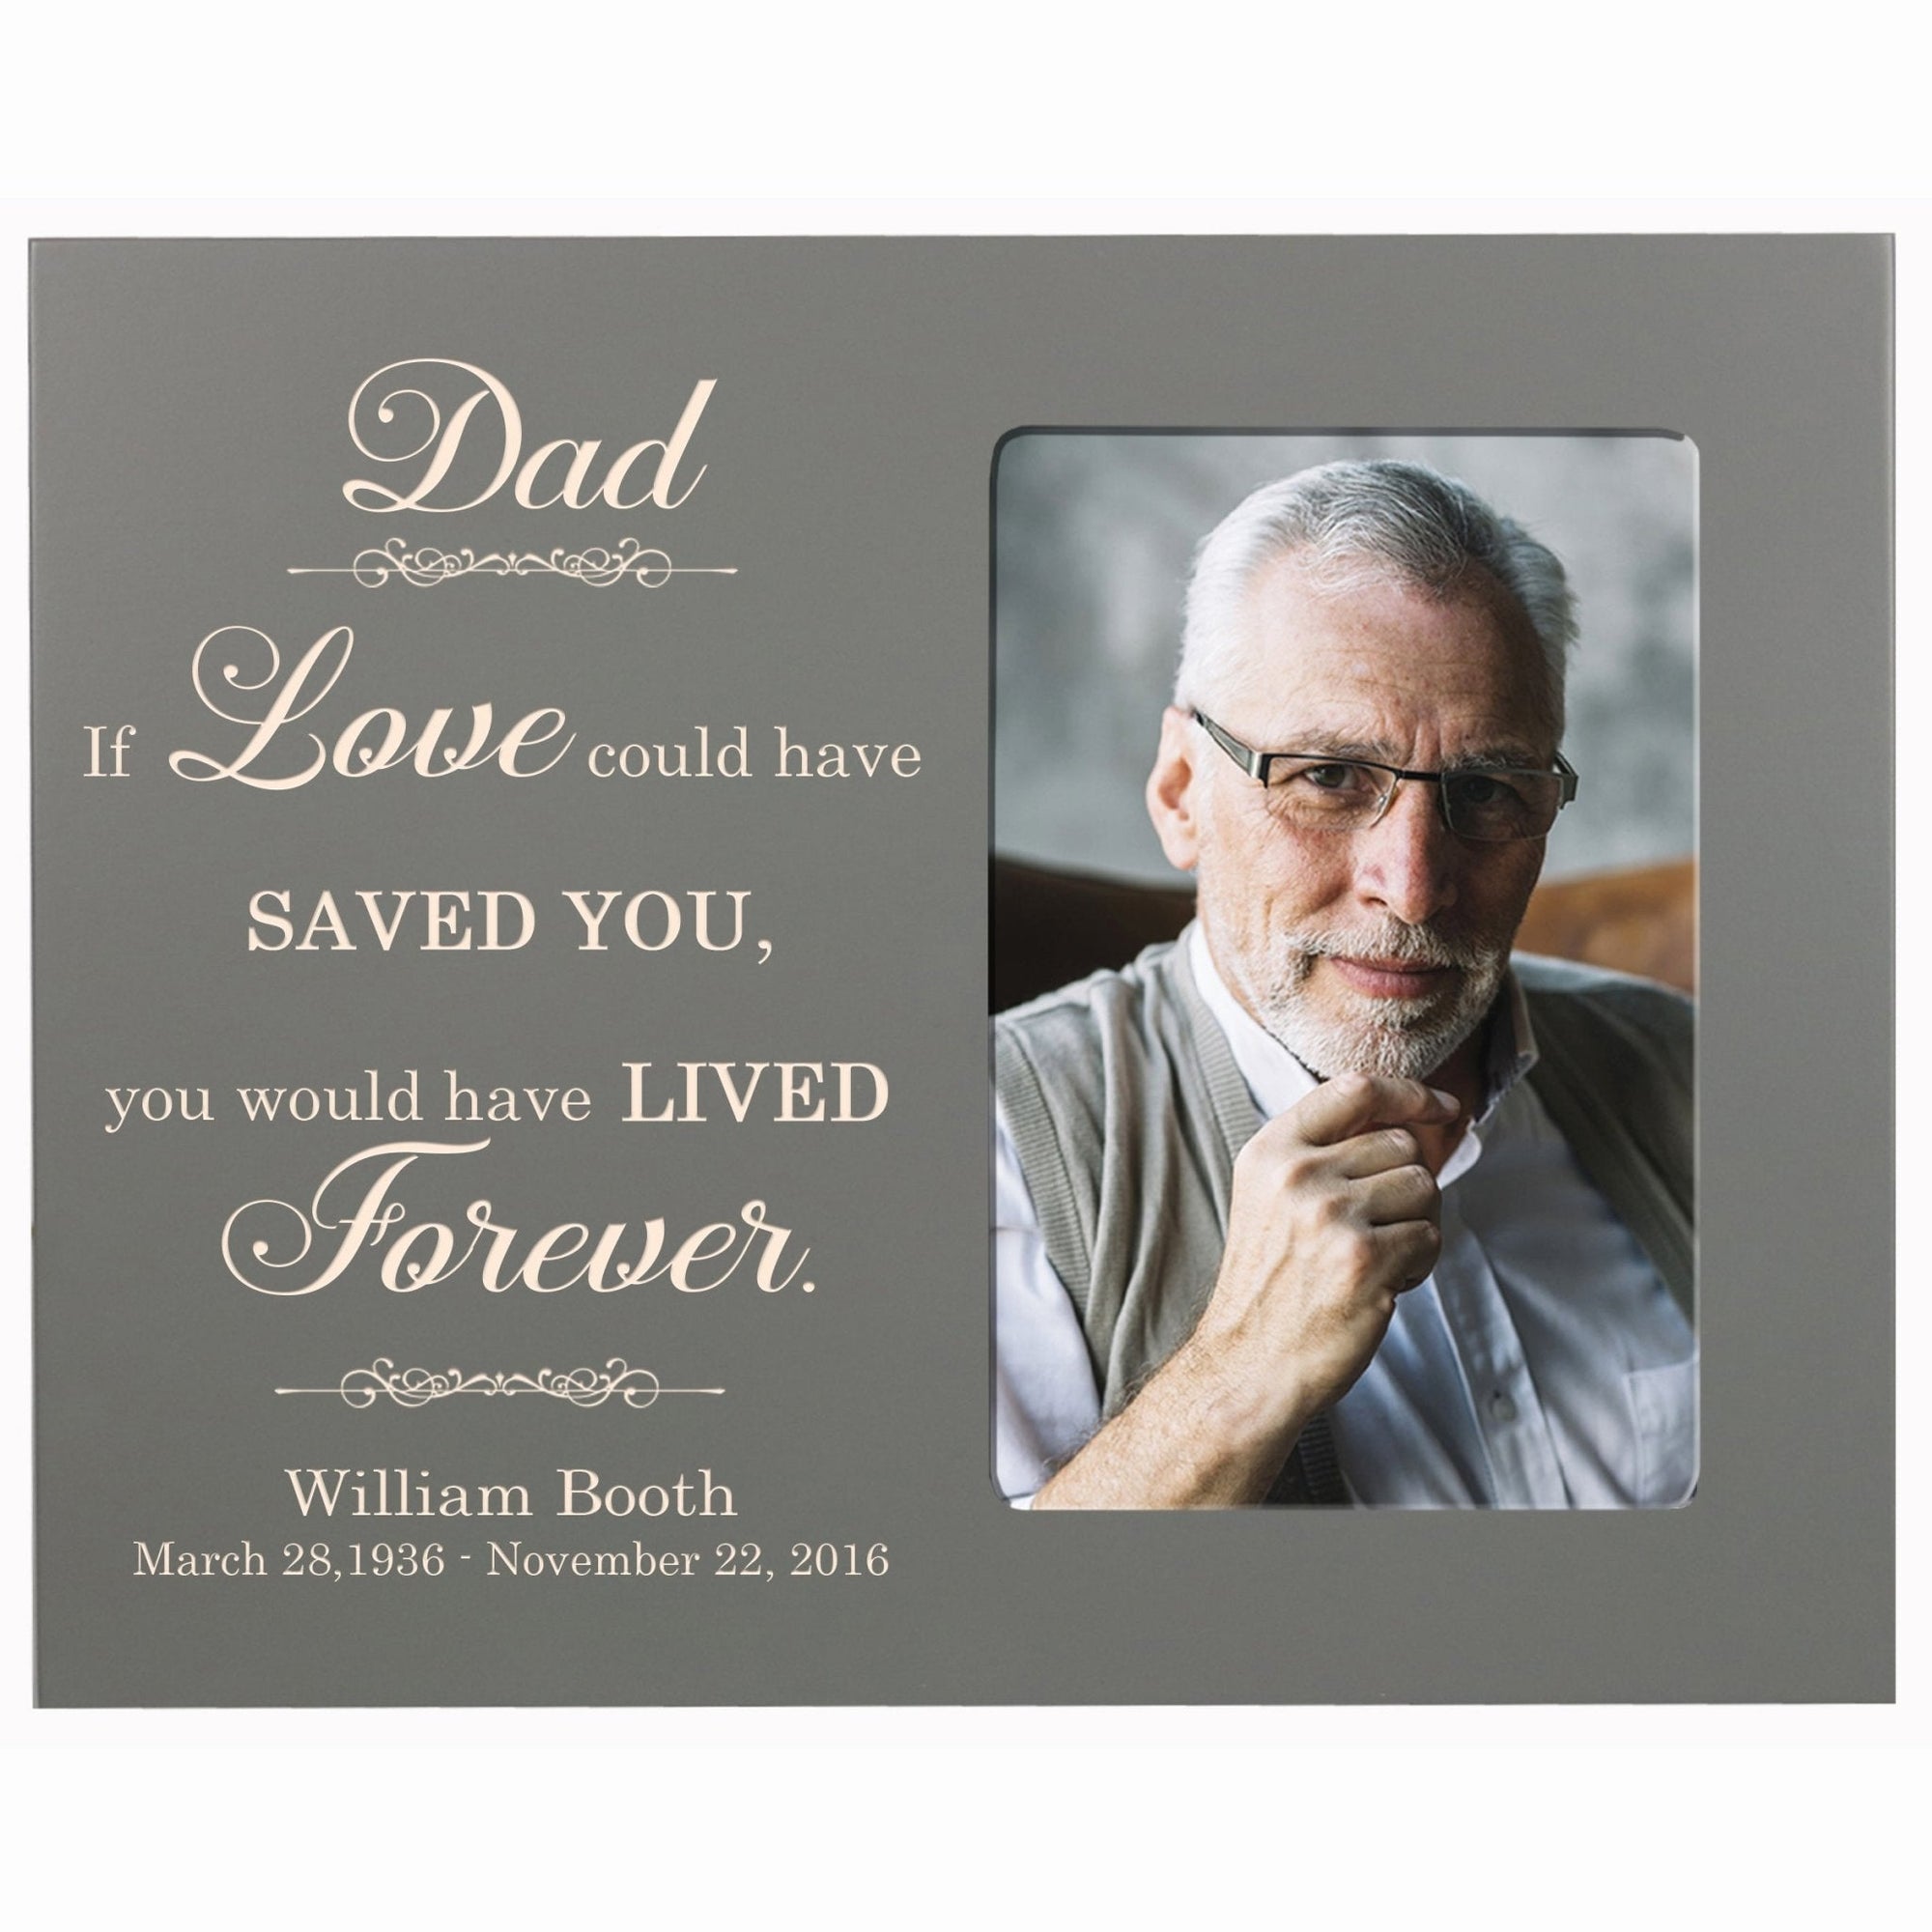 Personalized Horizontal 8x10 Wooden Memorial Picture Frame Holds 4x6 Photo - Dad, If Love Could - LifeSong Milestones